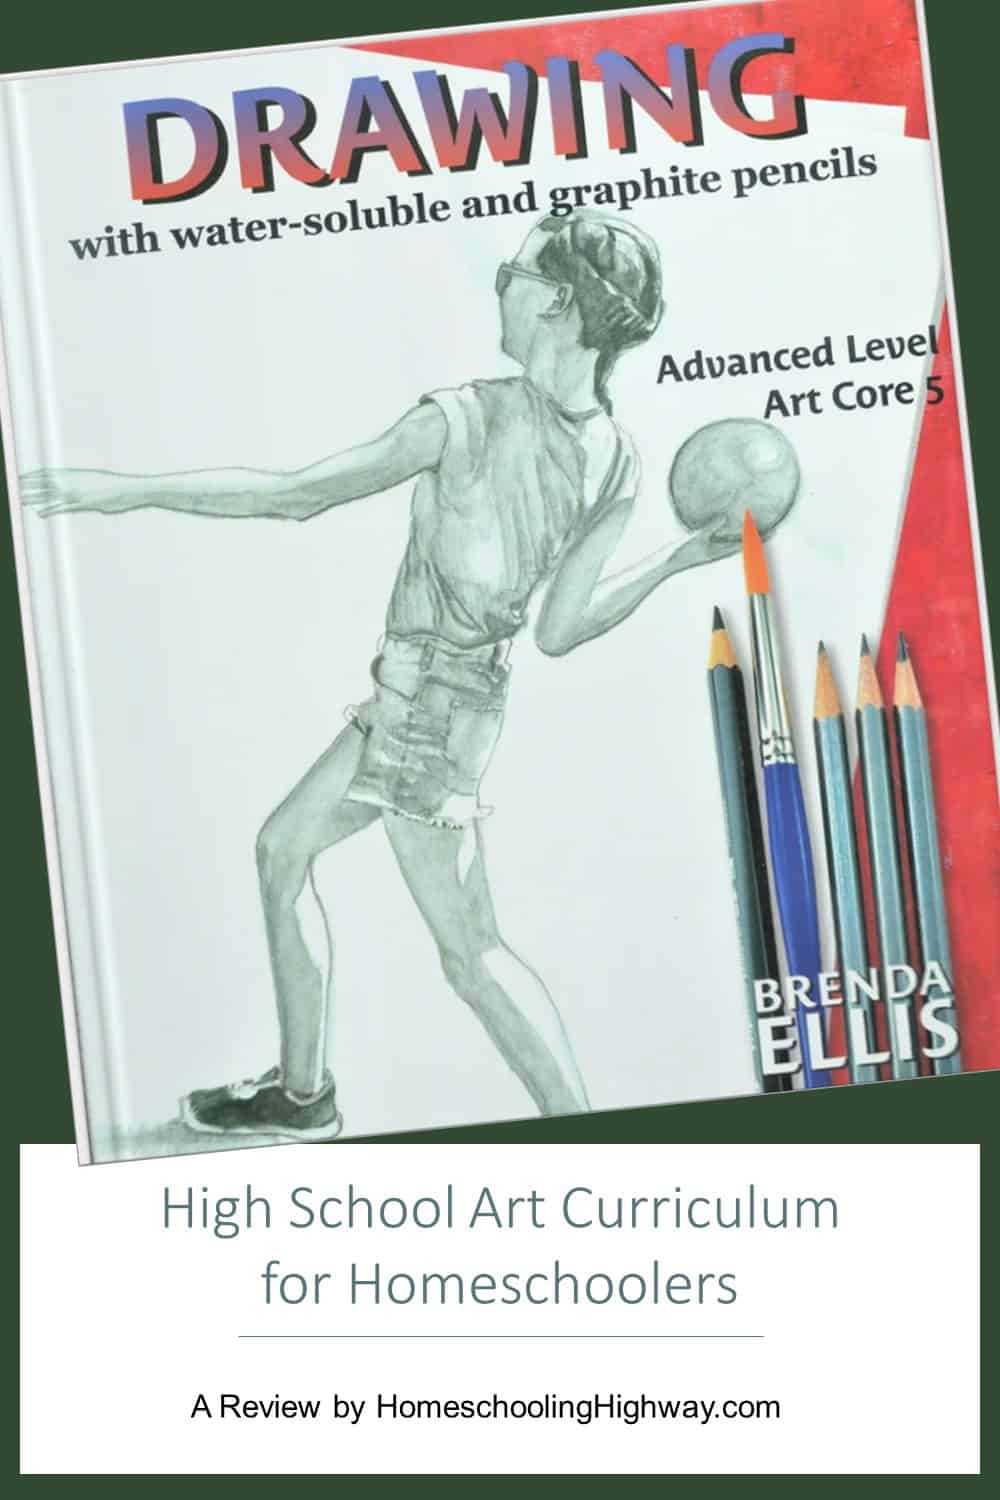 Drawing with Water Soluble and Graphite Pencils by ARTistic Pursuits. High school art curriculum reviewed by Homeschooling Highway